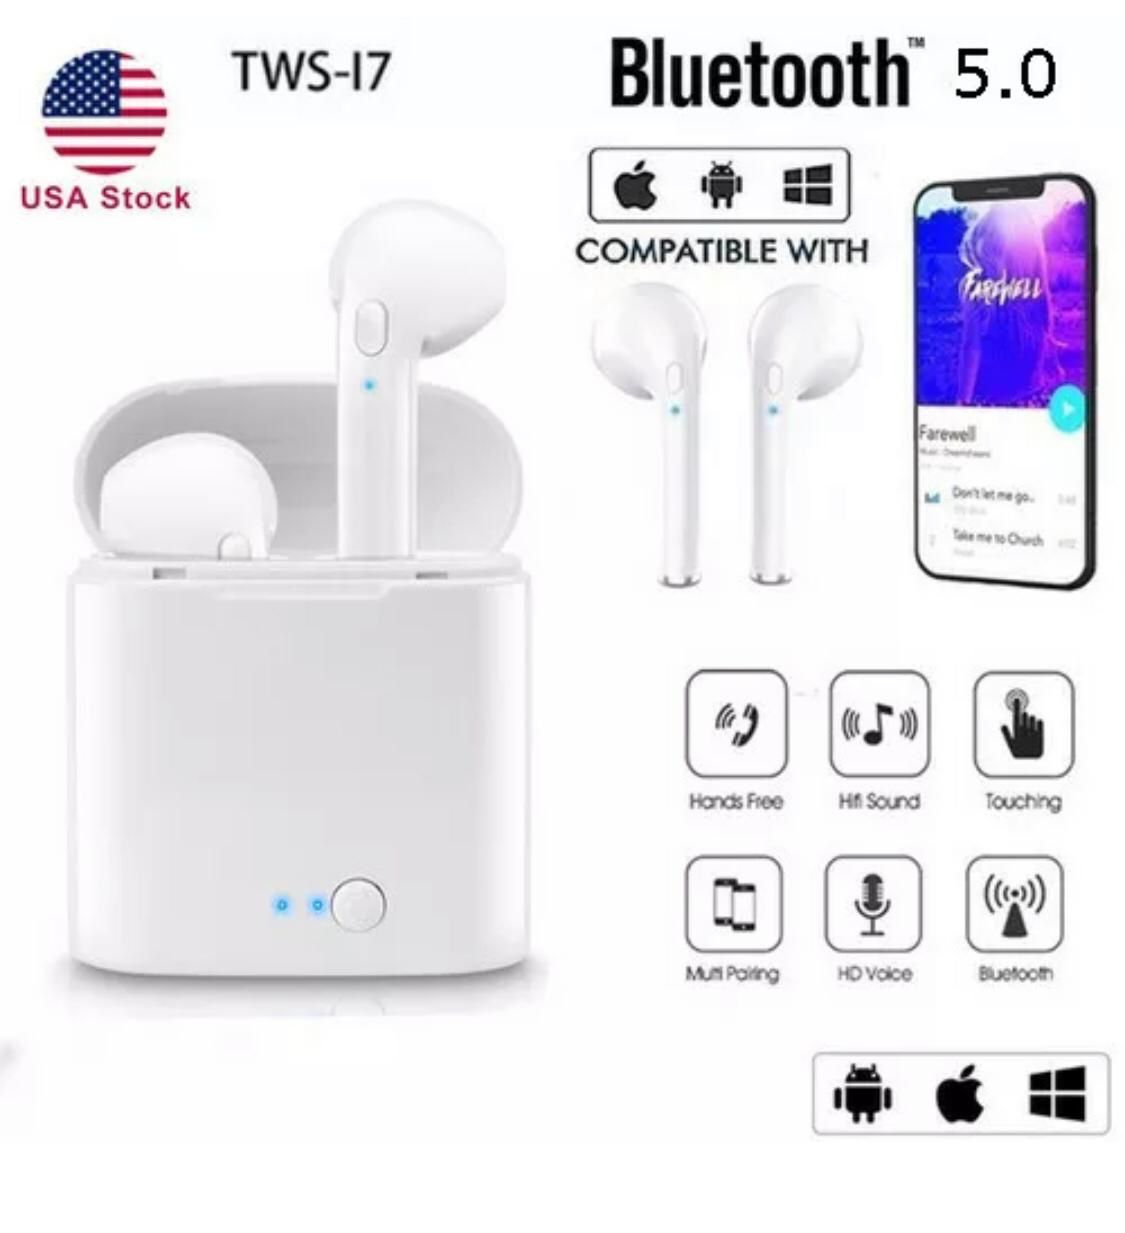 Brand new wireless Bluetooth headphones earbuds with charging case